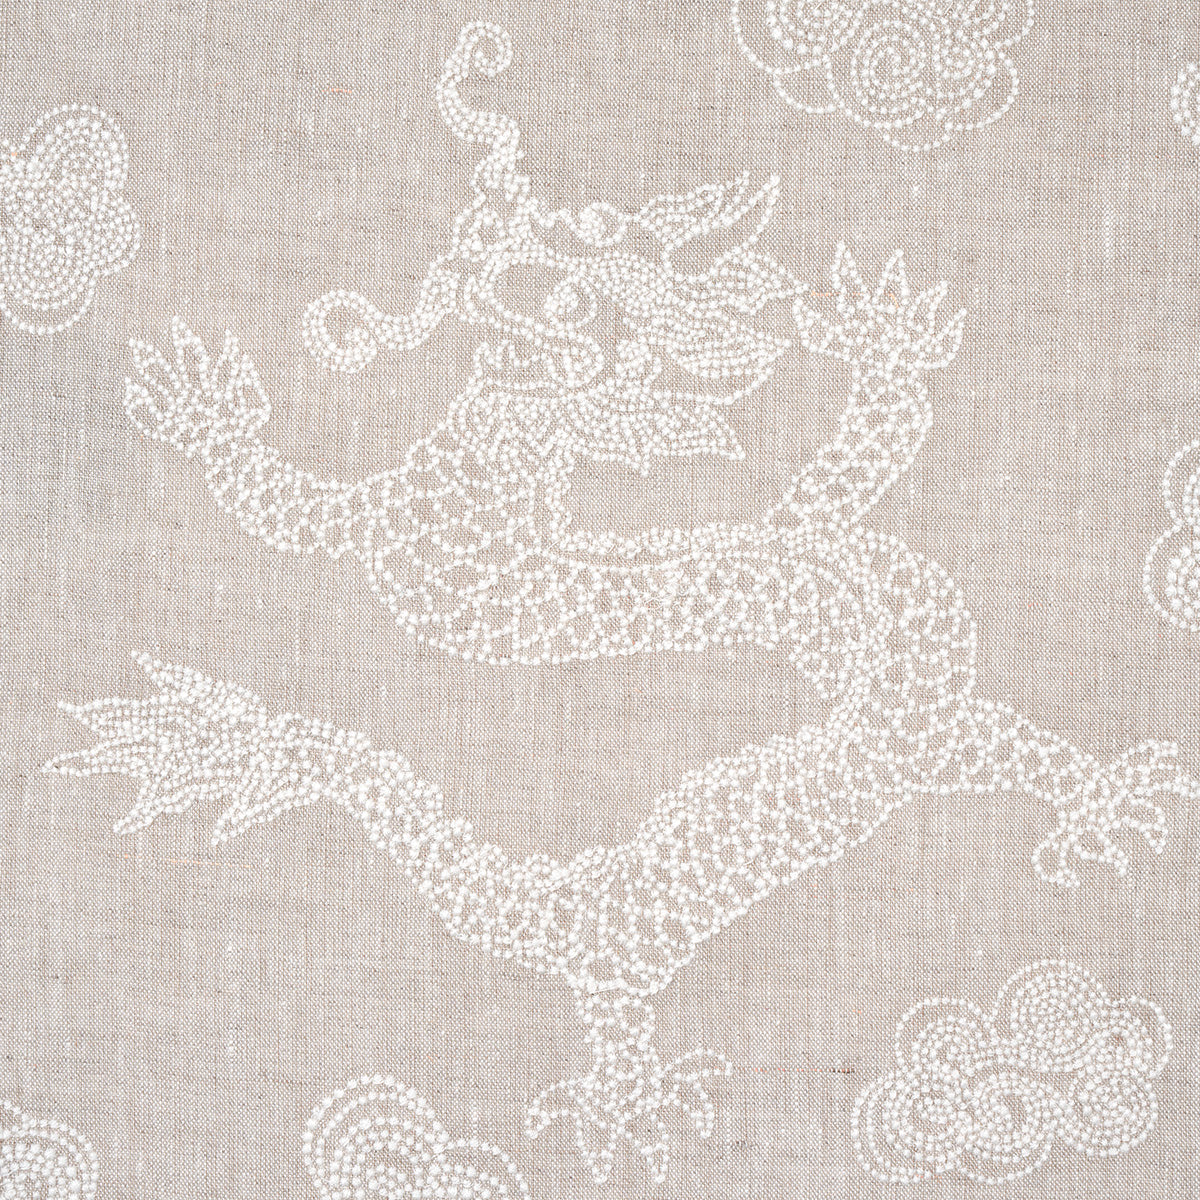 DRAGON EMBROIDERY | IVORY ON NATURAL